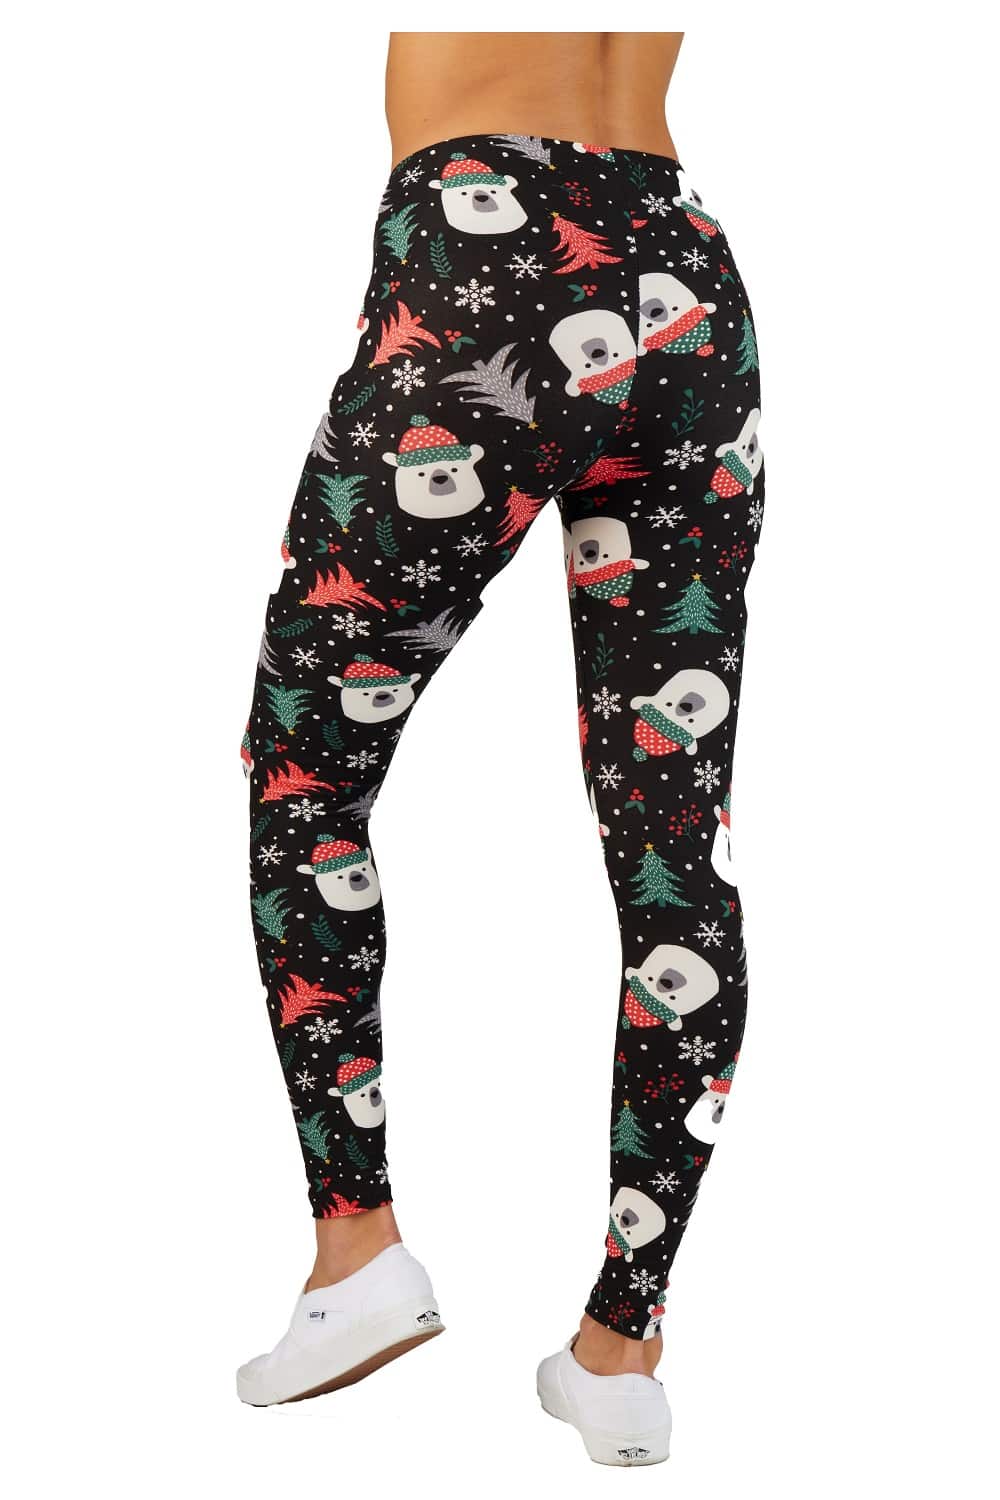 Christmas Tree Print Leggings, Affordable Trendy and Modest Clothing